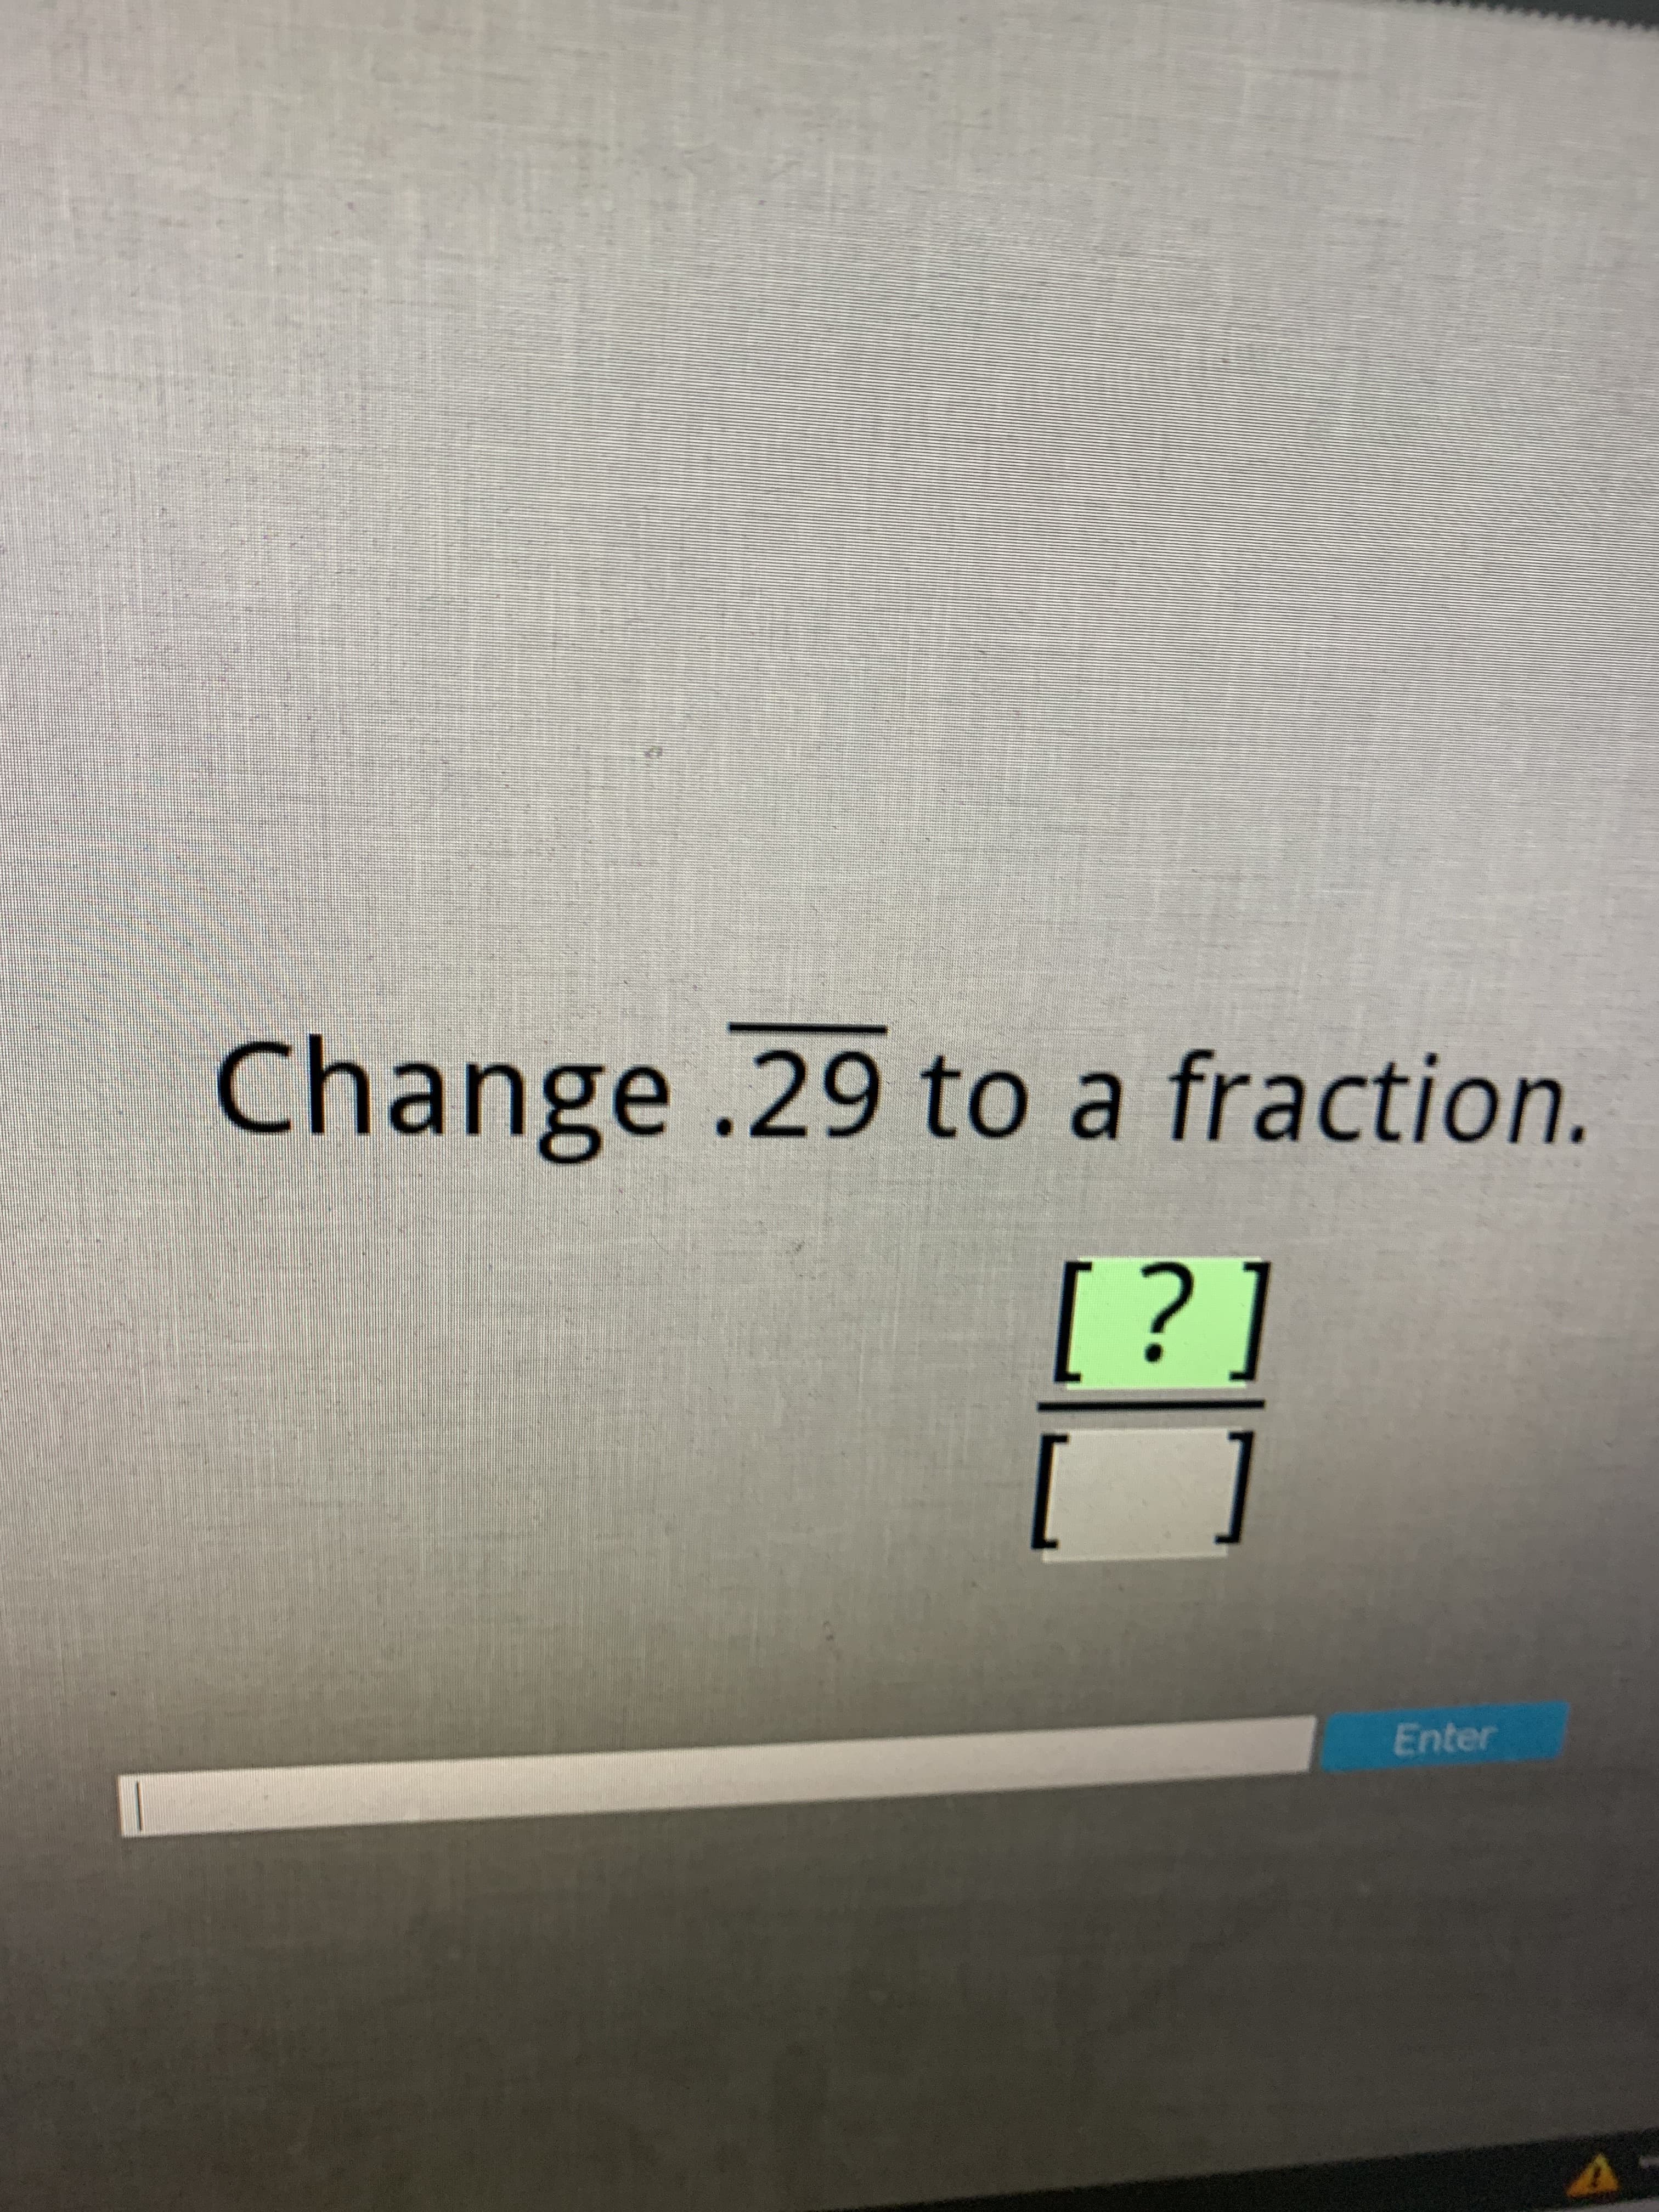 Change .29 to a fraction.
